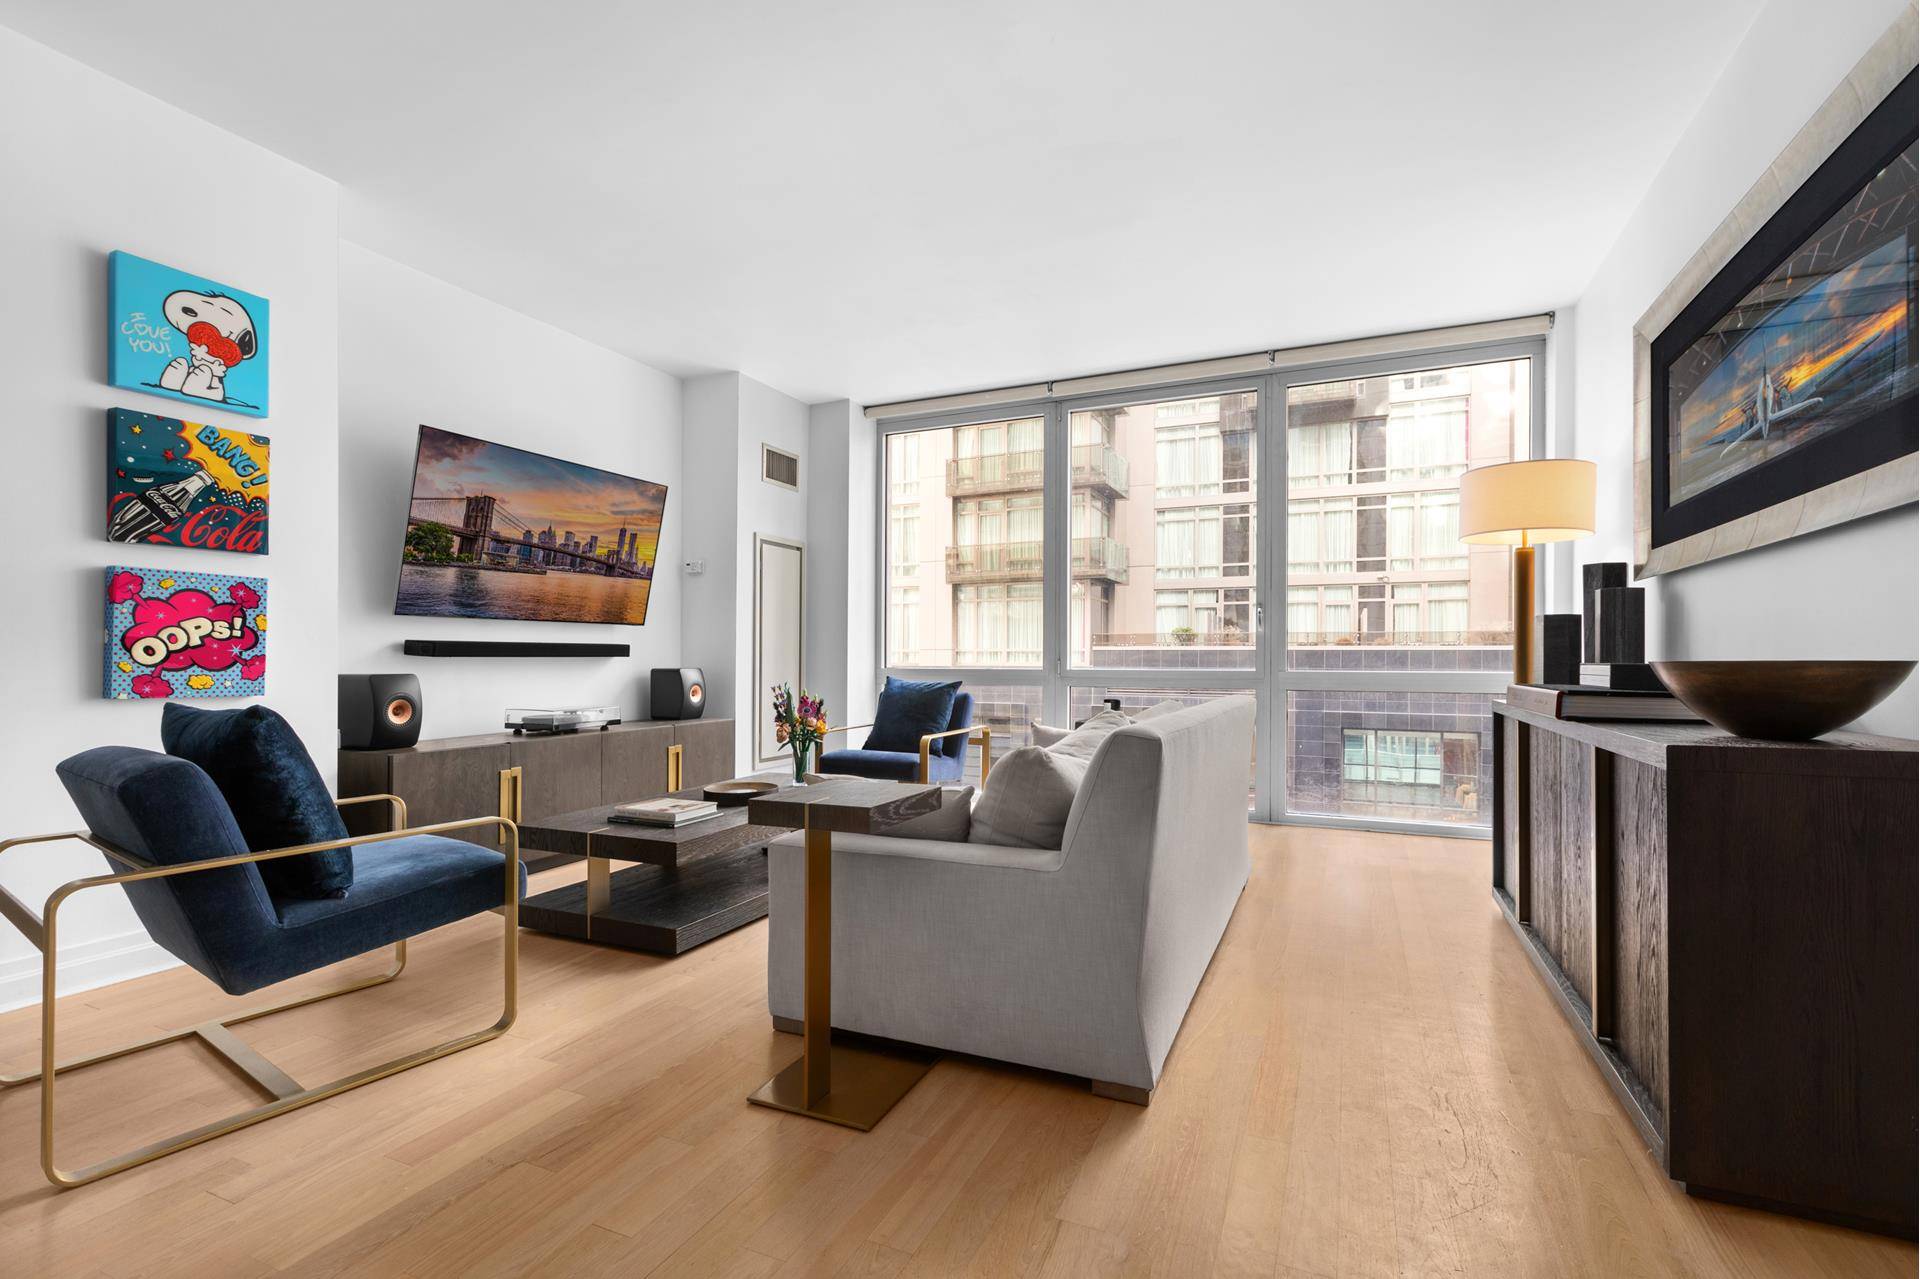 Welcome to Residence 4C at Twenty9th Park Madison, a stunningone bedroom, one bathroom home in one of NoMad's most coveted condominiumbuildings.